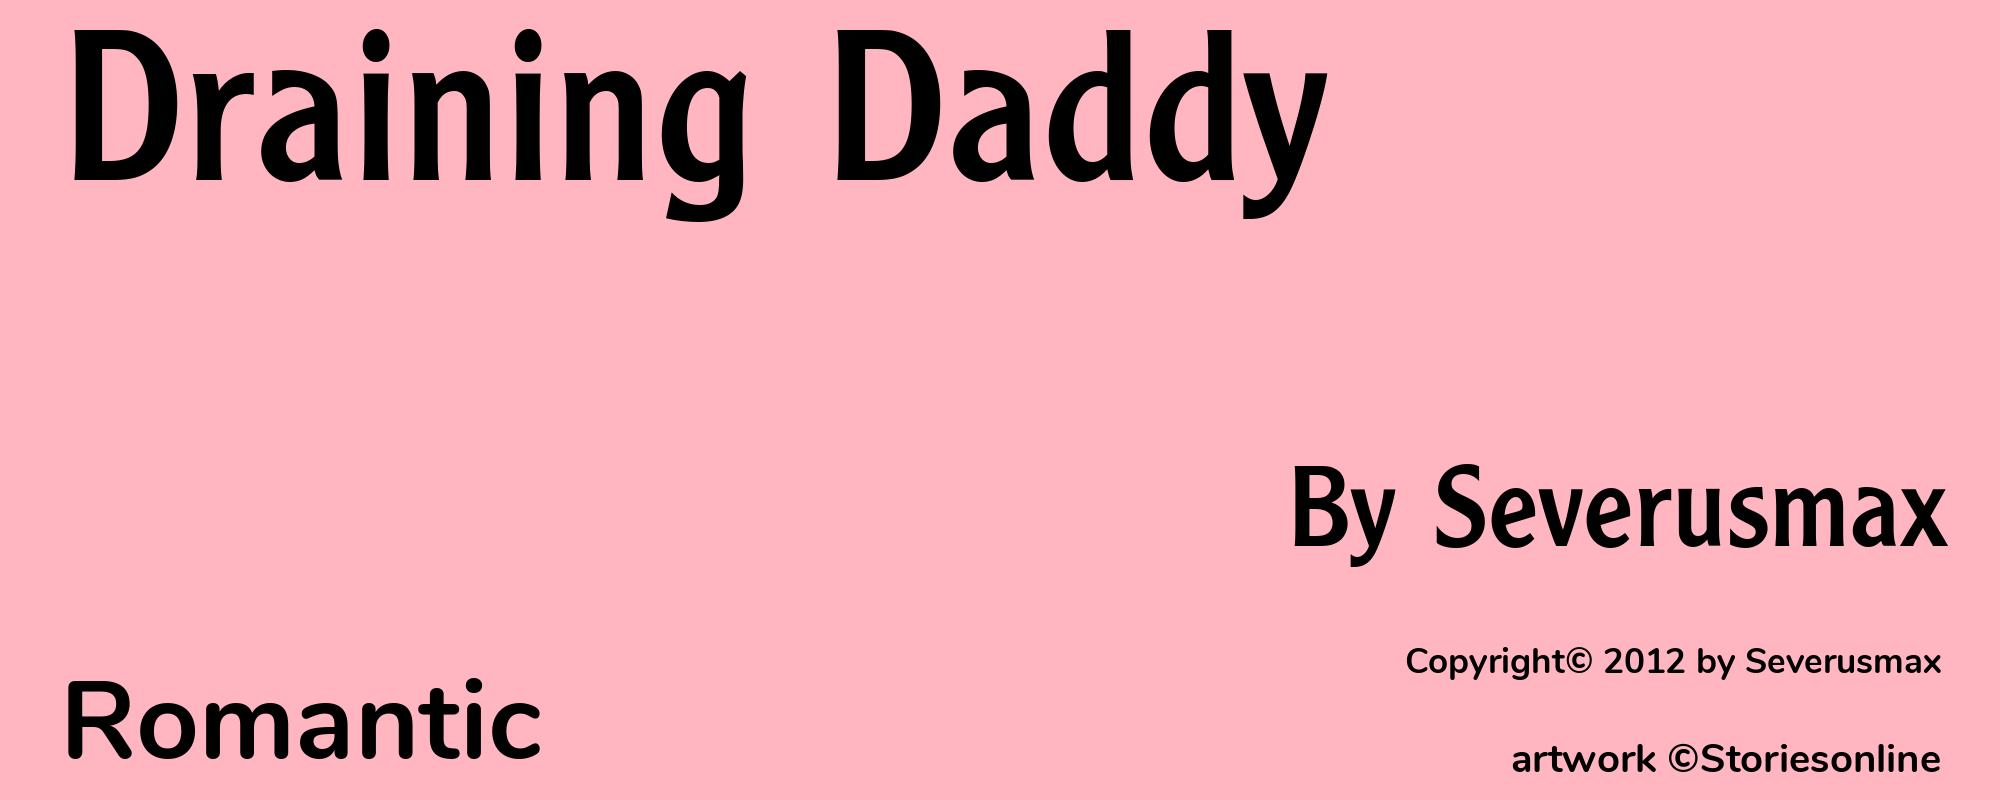 Draining Daddy - Cover